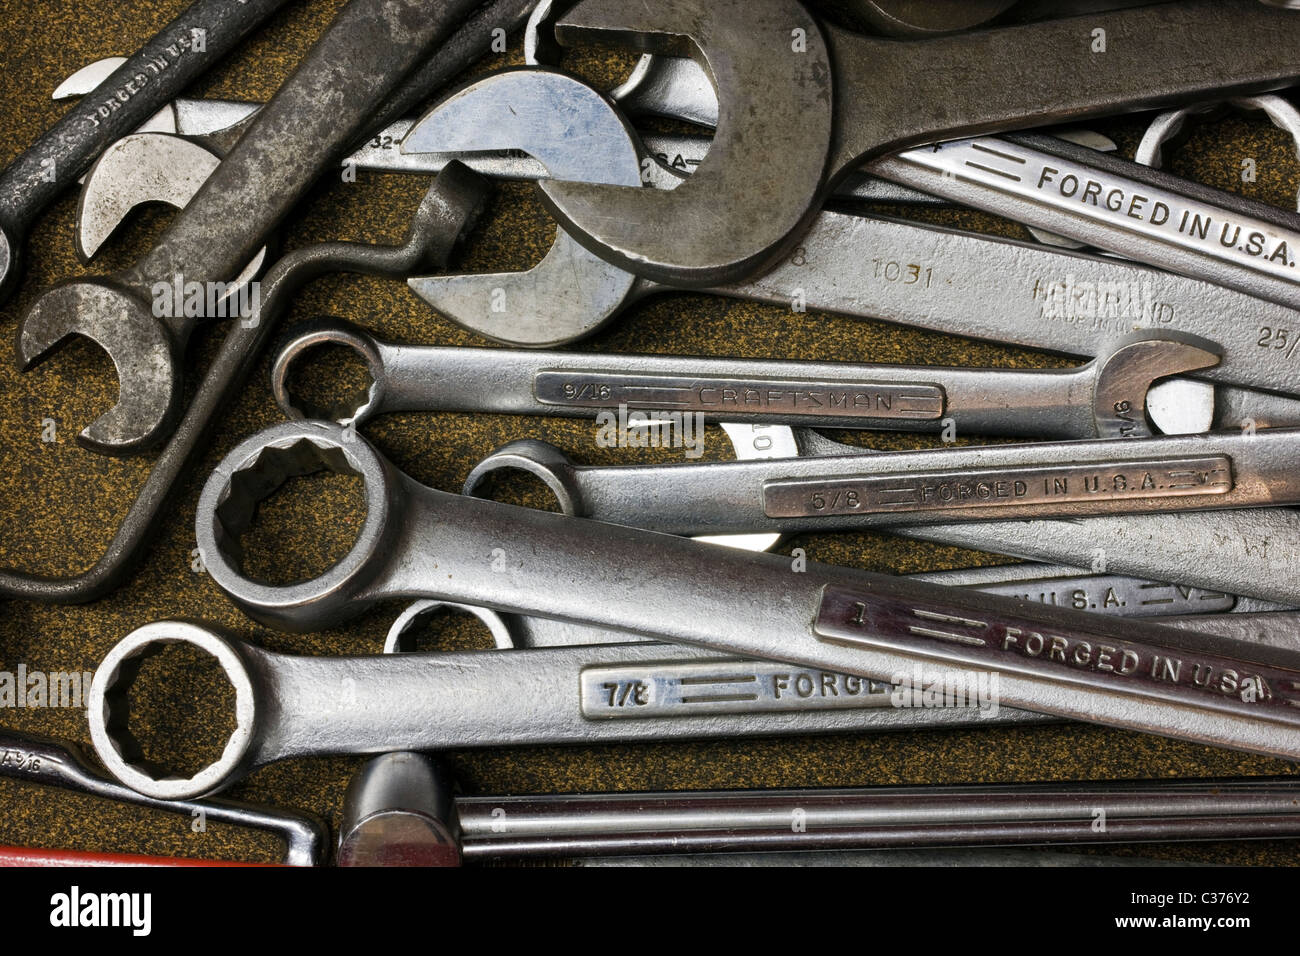 Сar driver using variety repair tools for repairing and diagnostic a car.  Tool set near the orange auto. Mechanic tools in box, closeup Stock Photo -  Alamy